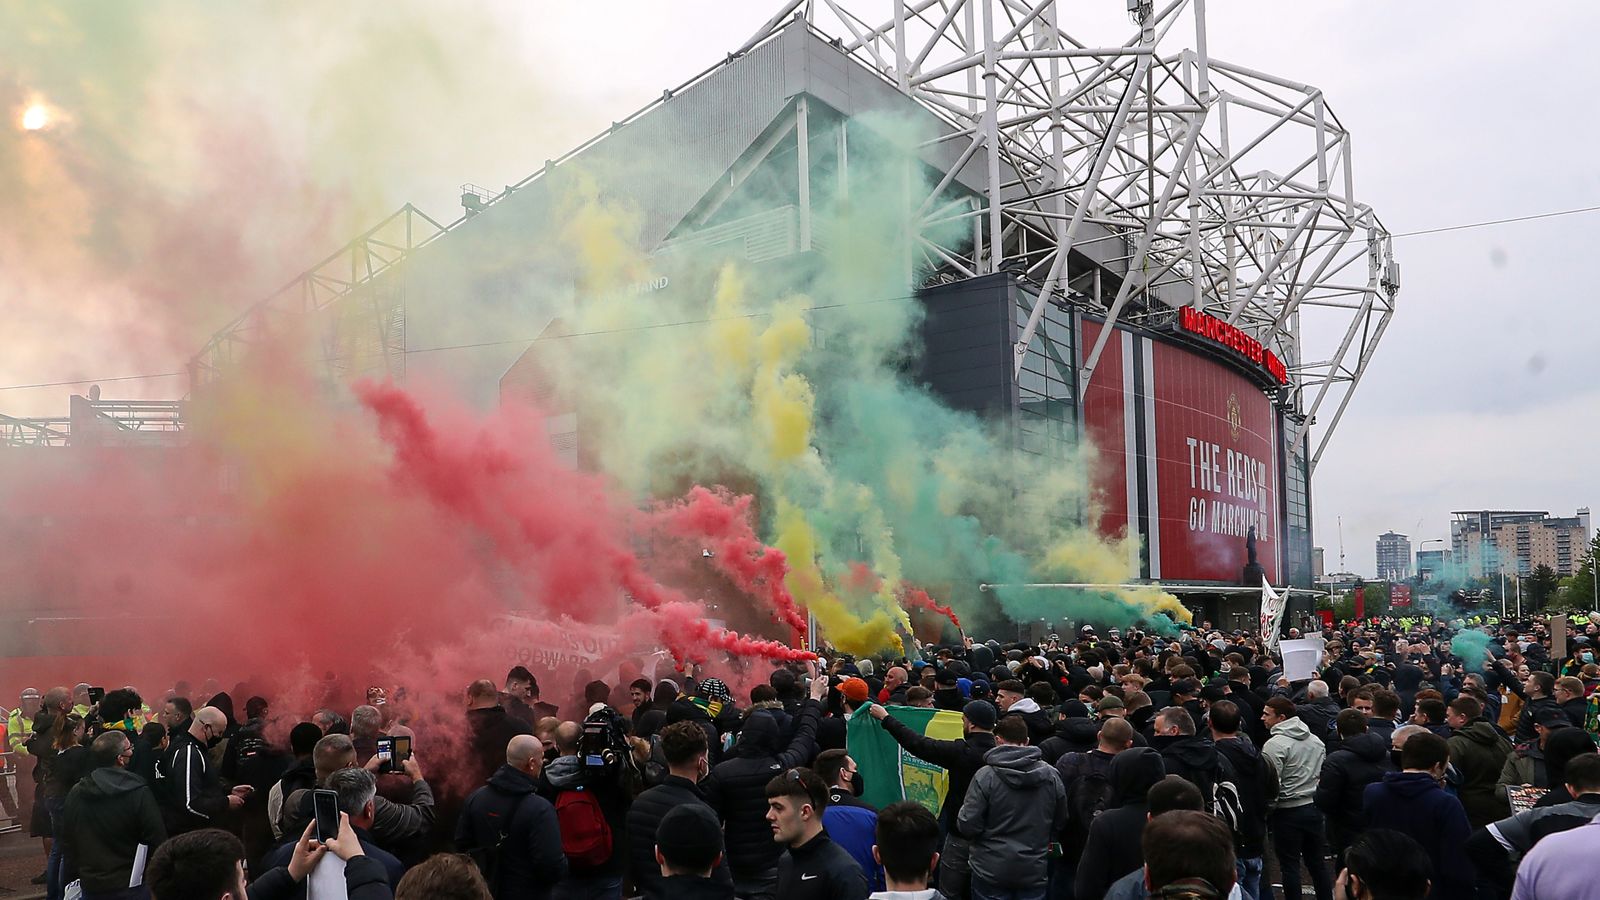 Fans sentenced for violent Old Trafford protest | Police release new video thumbnail